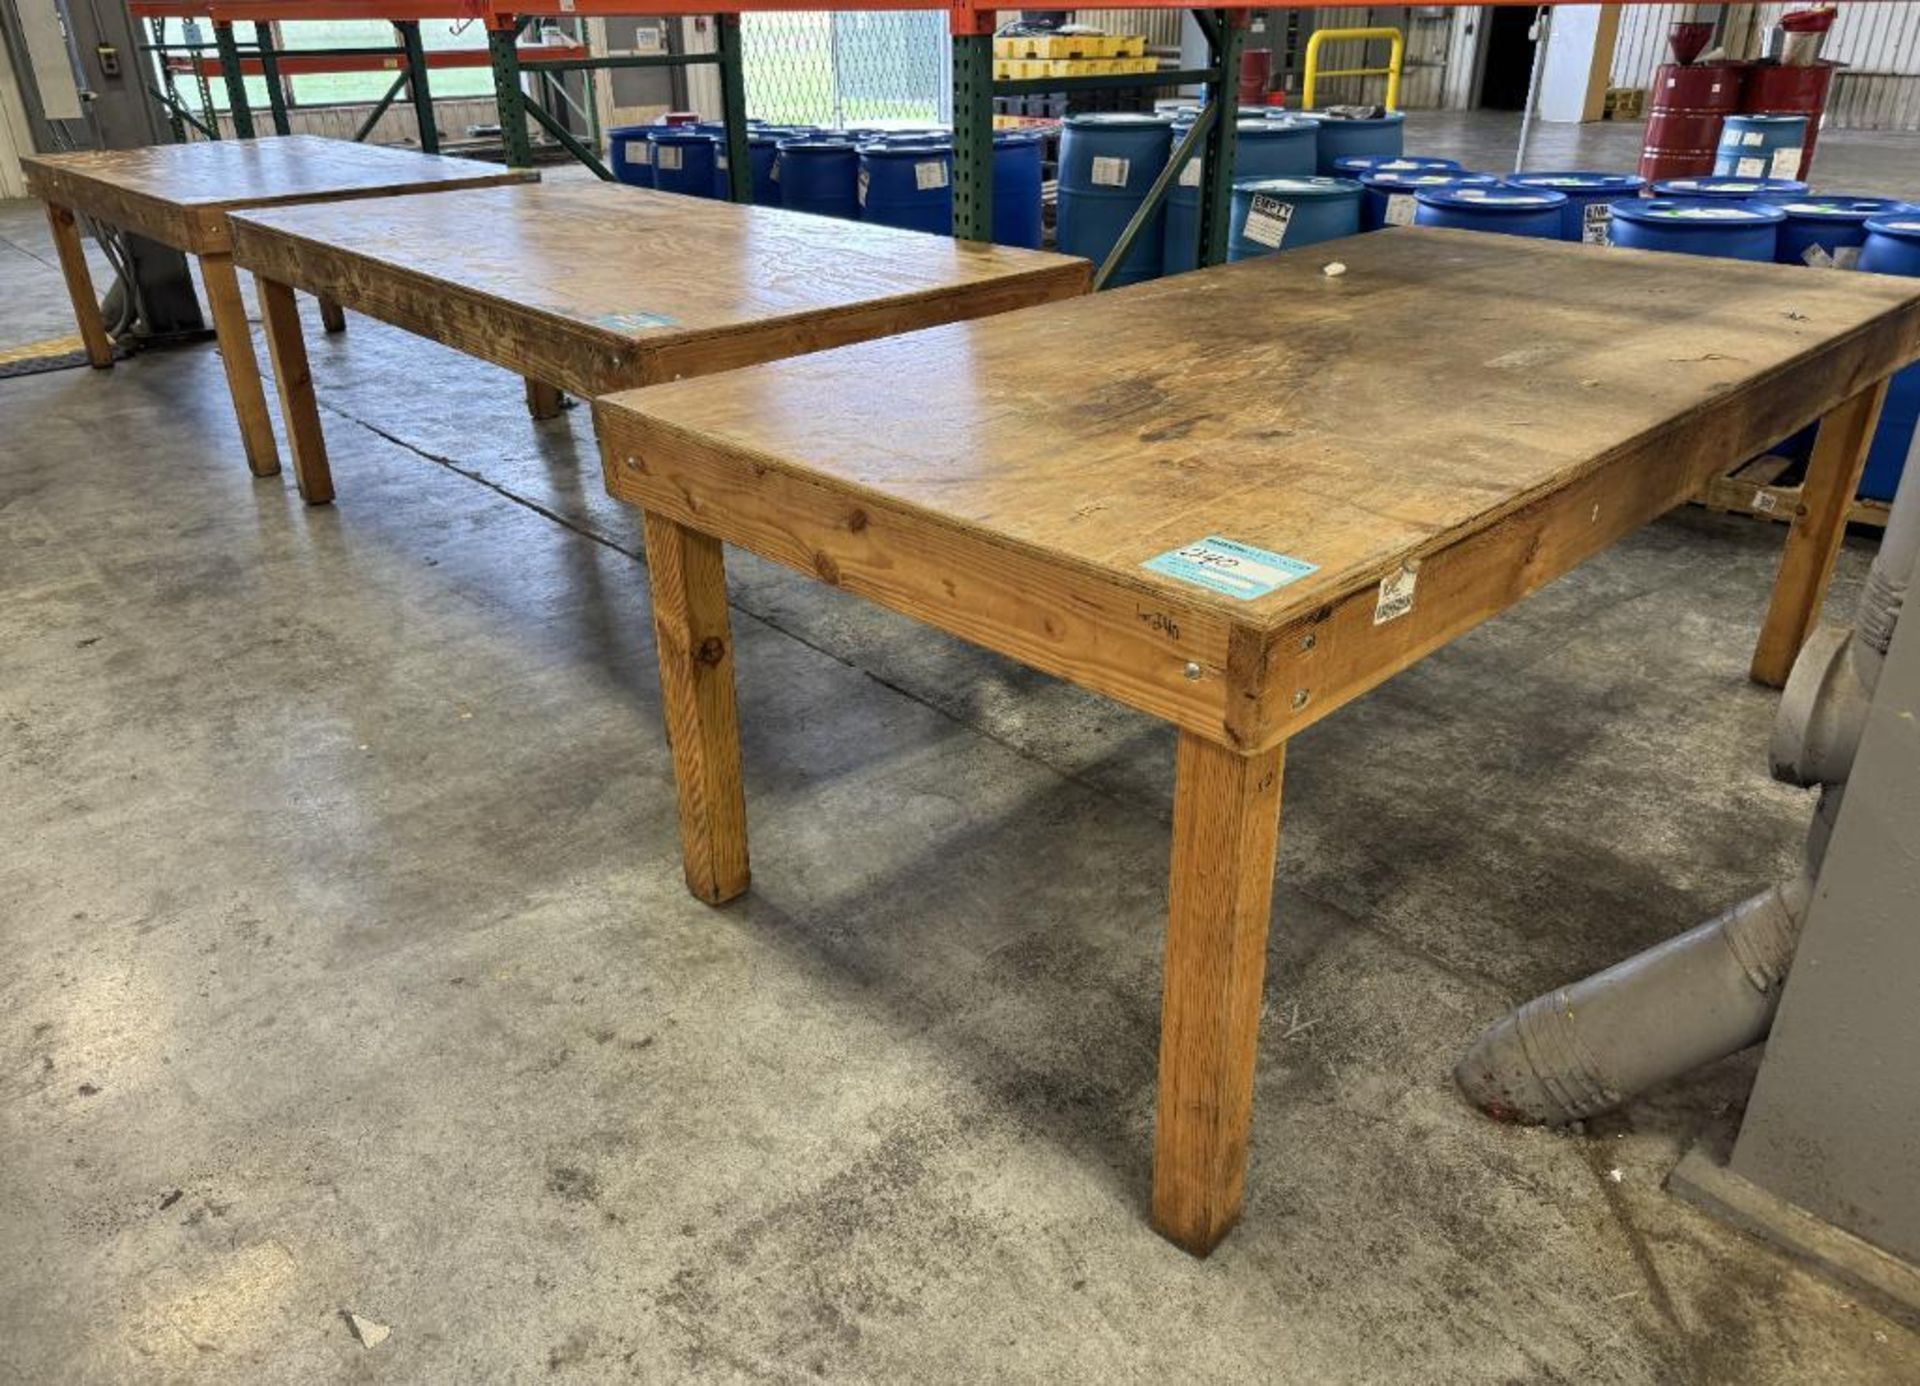 Lot Of (3) Wooden Tables, Approximate 48" x 96".